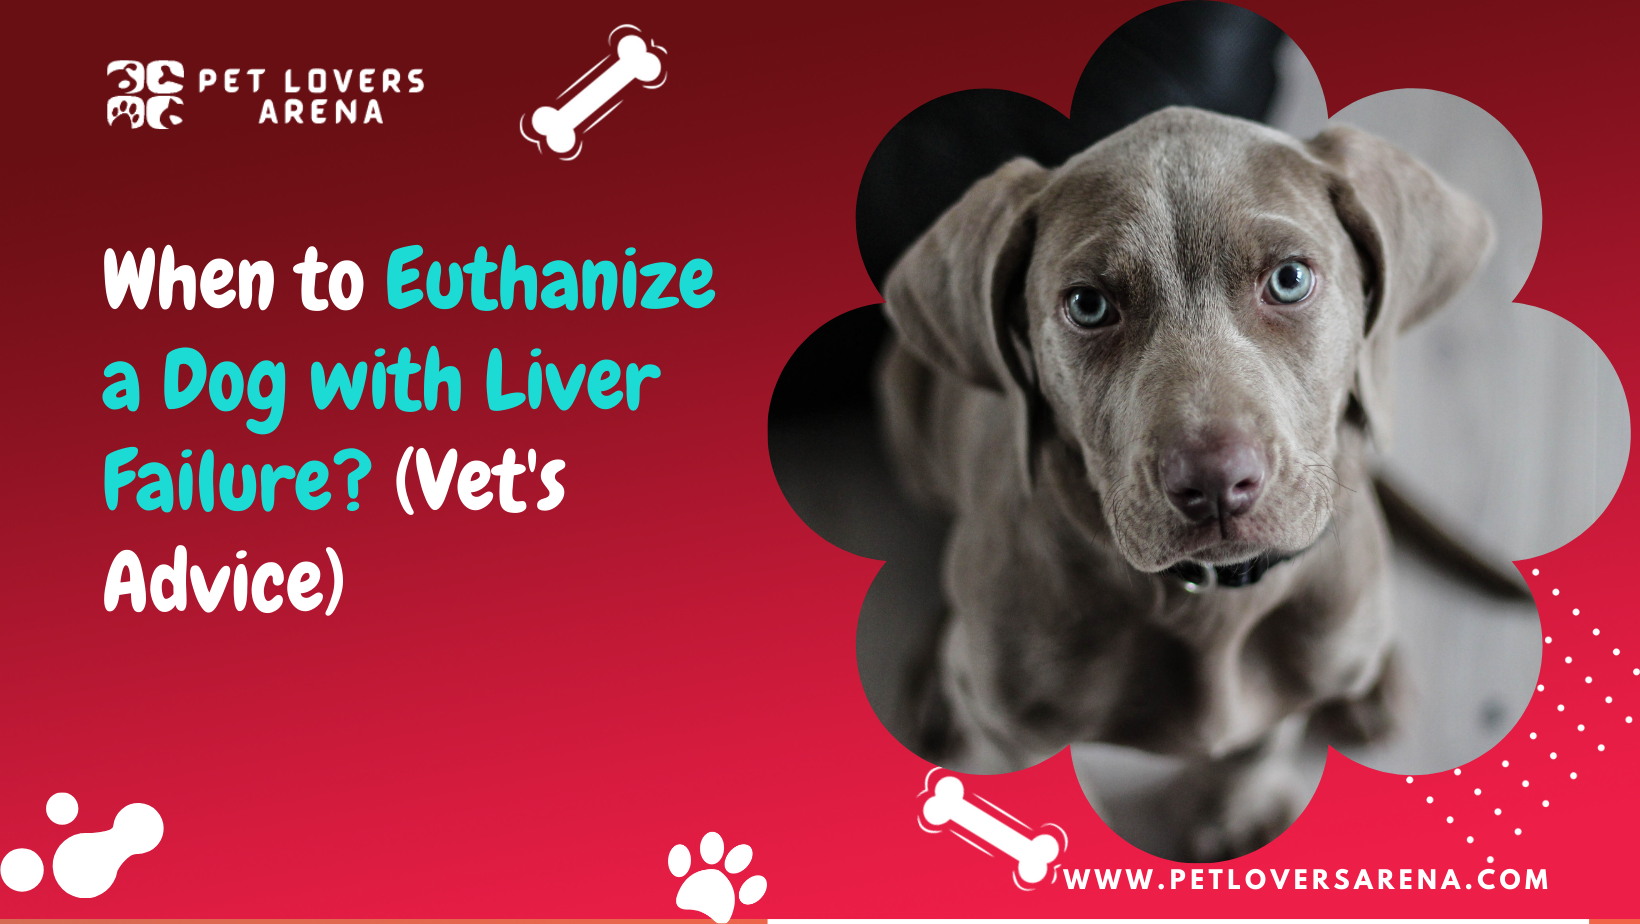 When to Euthanize a Dog with Liver Failure?